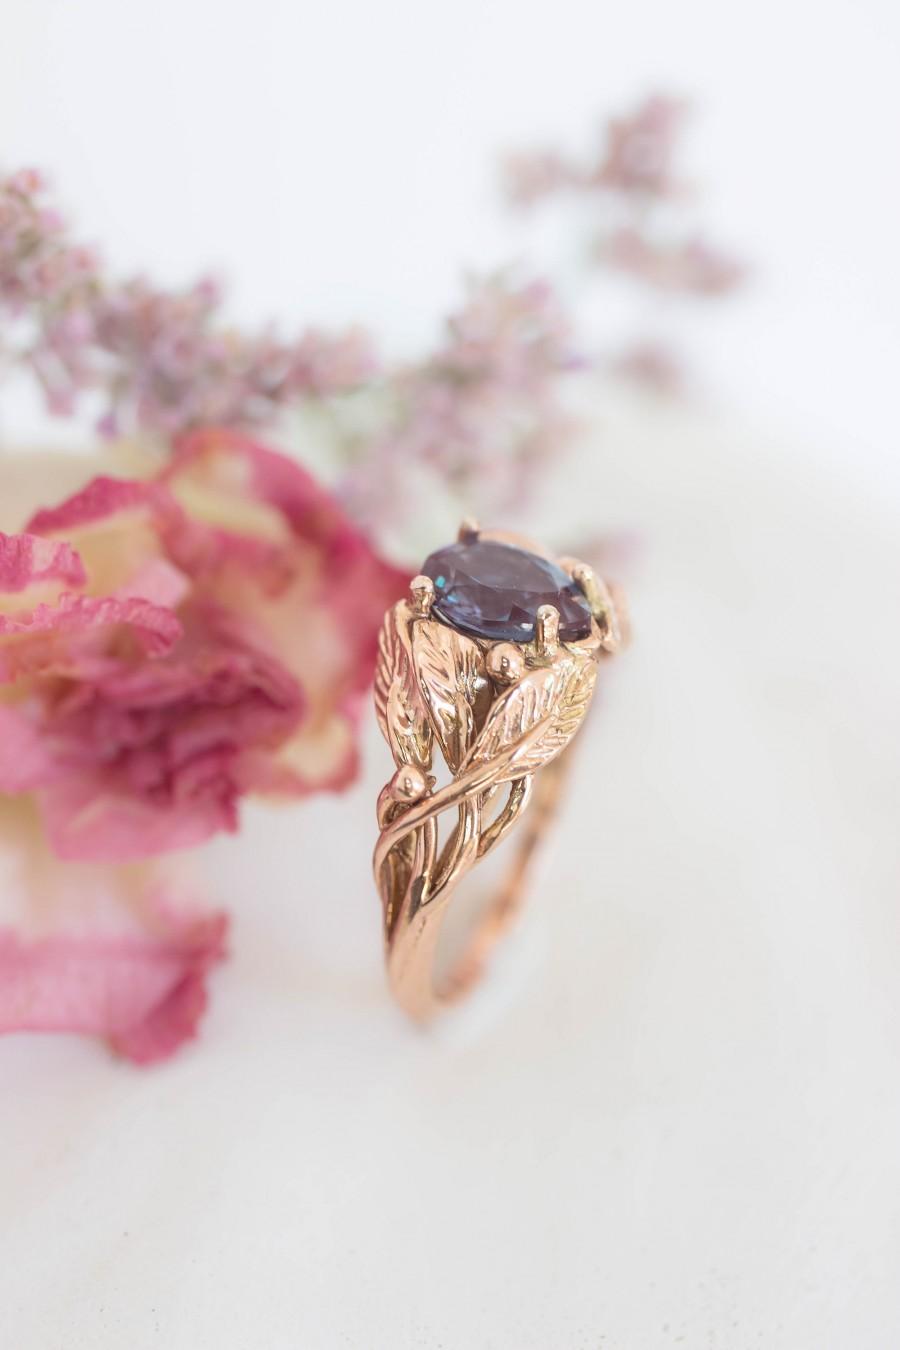 Hochzeit - Pear cut alexandrite engagement ring, wedding ring for woman, leaves ring, nature jewelry, leaf ring, teardrop ring, colour change, 14K gold